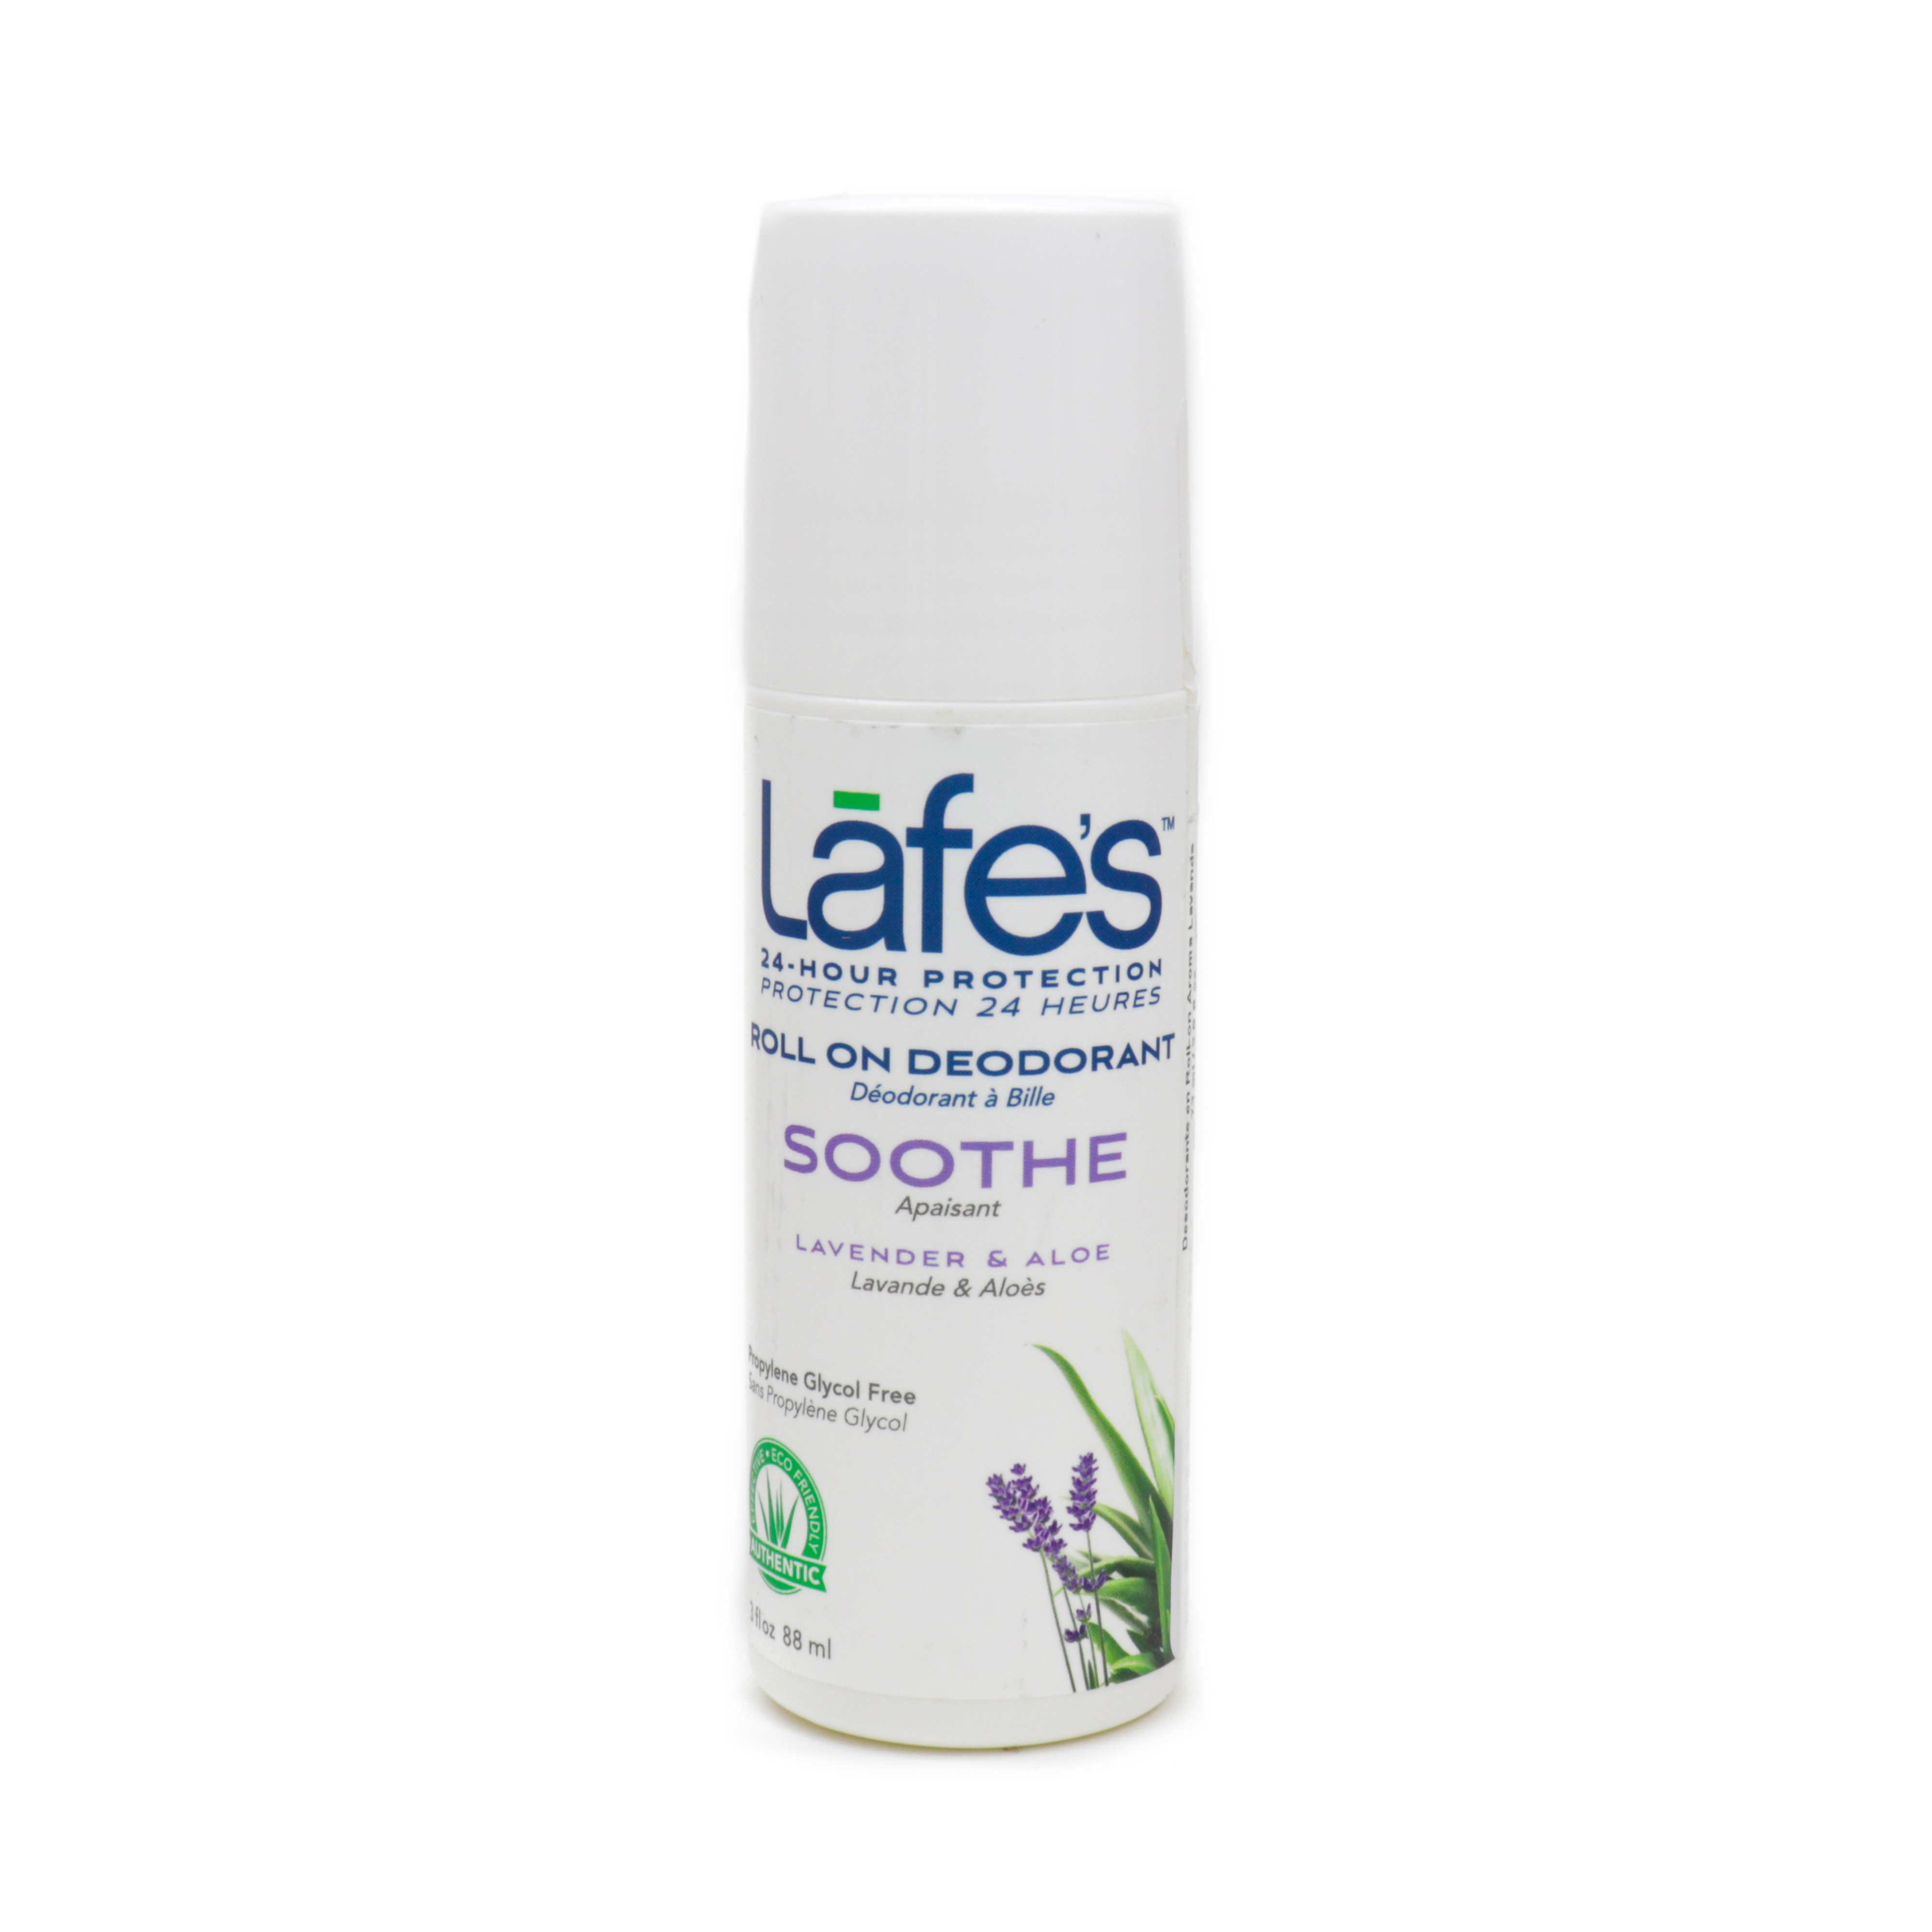 Lafes Desodorante roll on aroma soothe 71 g